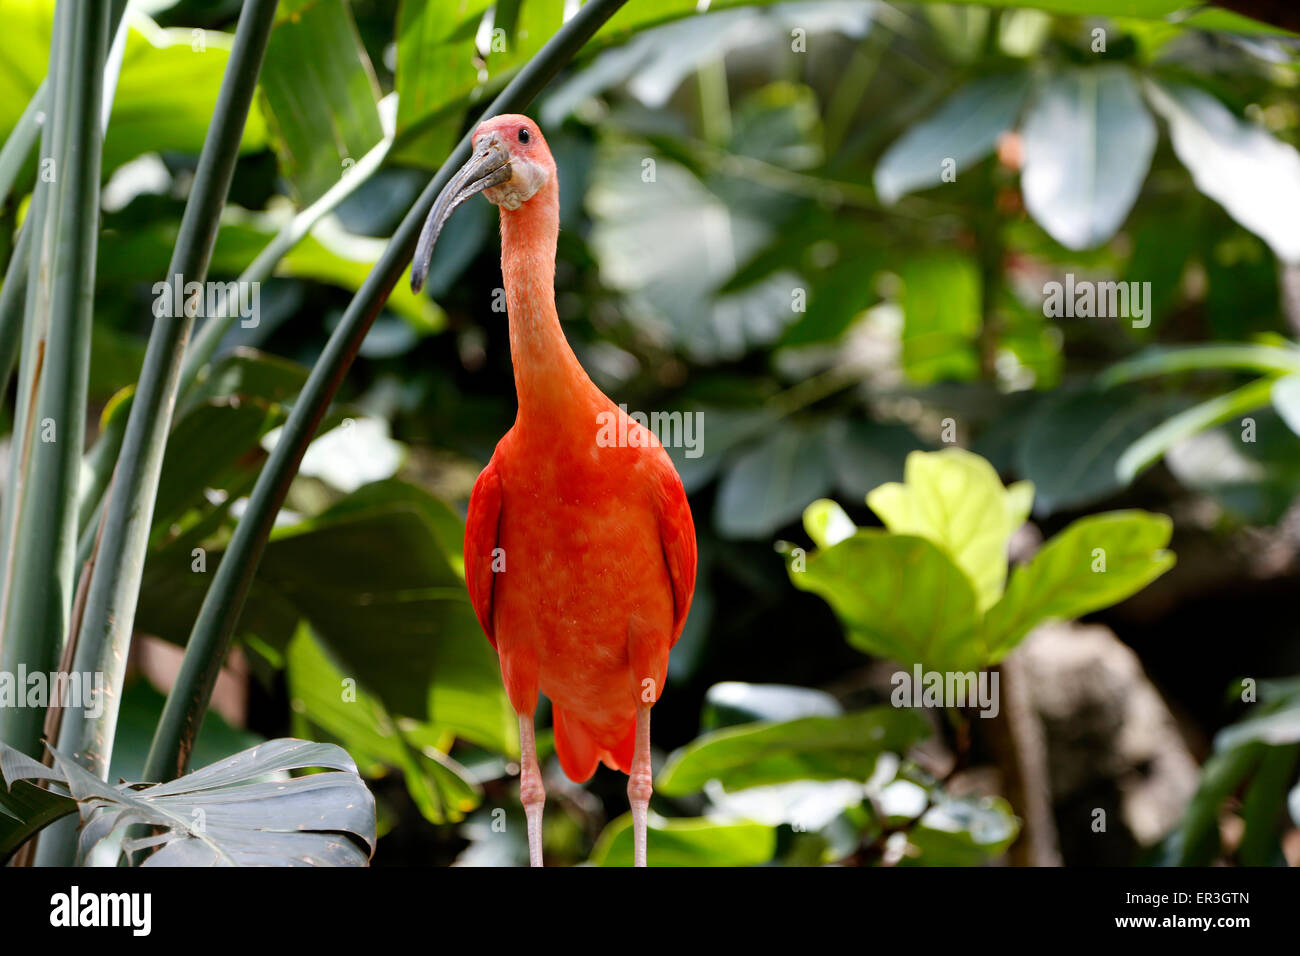 The scarlet Ibis is found in tropical South America and the Caribbean. It wades and uses it's long bill to search for insects. Stock Photo